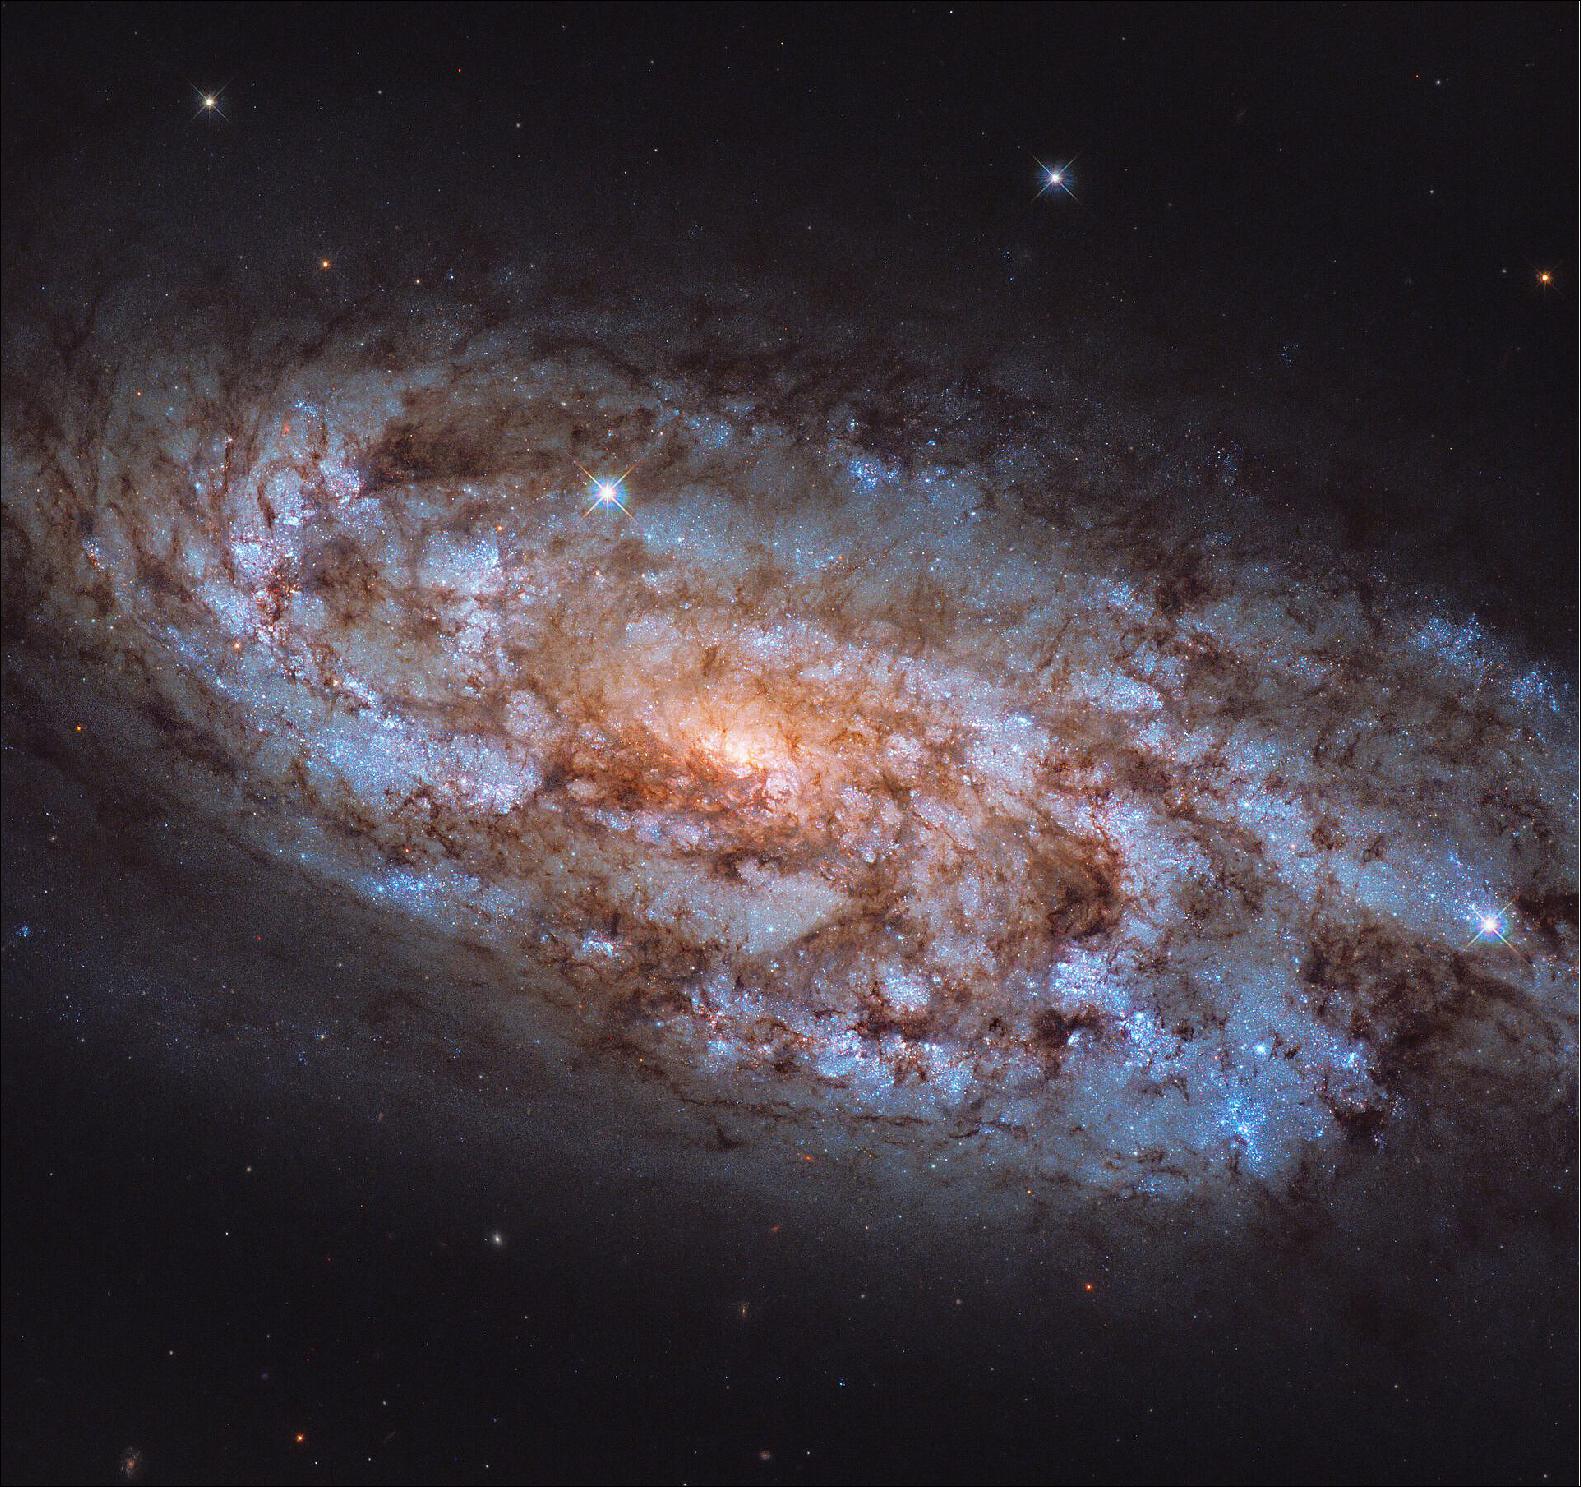 Figure 3: An orange glow radiates from the center of NGC 1792, the heart of this stellar forge. Captured by the NASA/ESA Hubble Space Telescope, this intimate view of NGC 1792 gives us some insight into this galactic powerhouse. The vast swathes of tell-tale blue seen throughout the galaxy indicate areas that are full of young, hot stars, and it is in the shades of orange, seen nearer the centre, that the older, cooler stars reside (image credit: ESA/Hubble & NASA, J. Lee; CC BY 4.0 Acknowledgement: Leo Shatz)